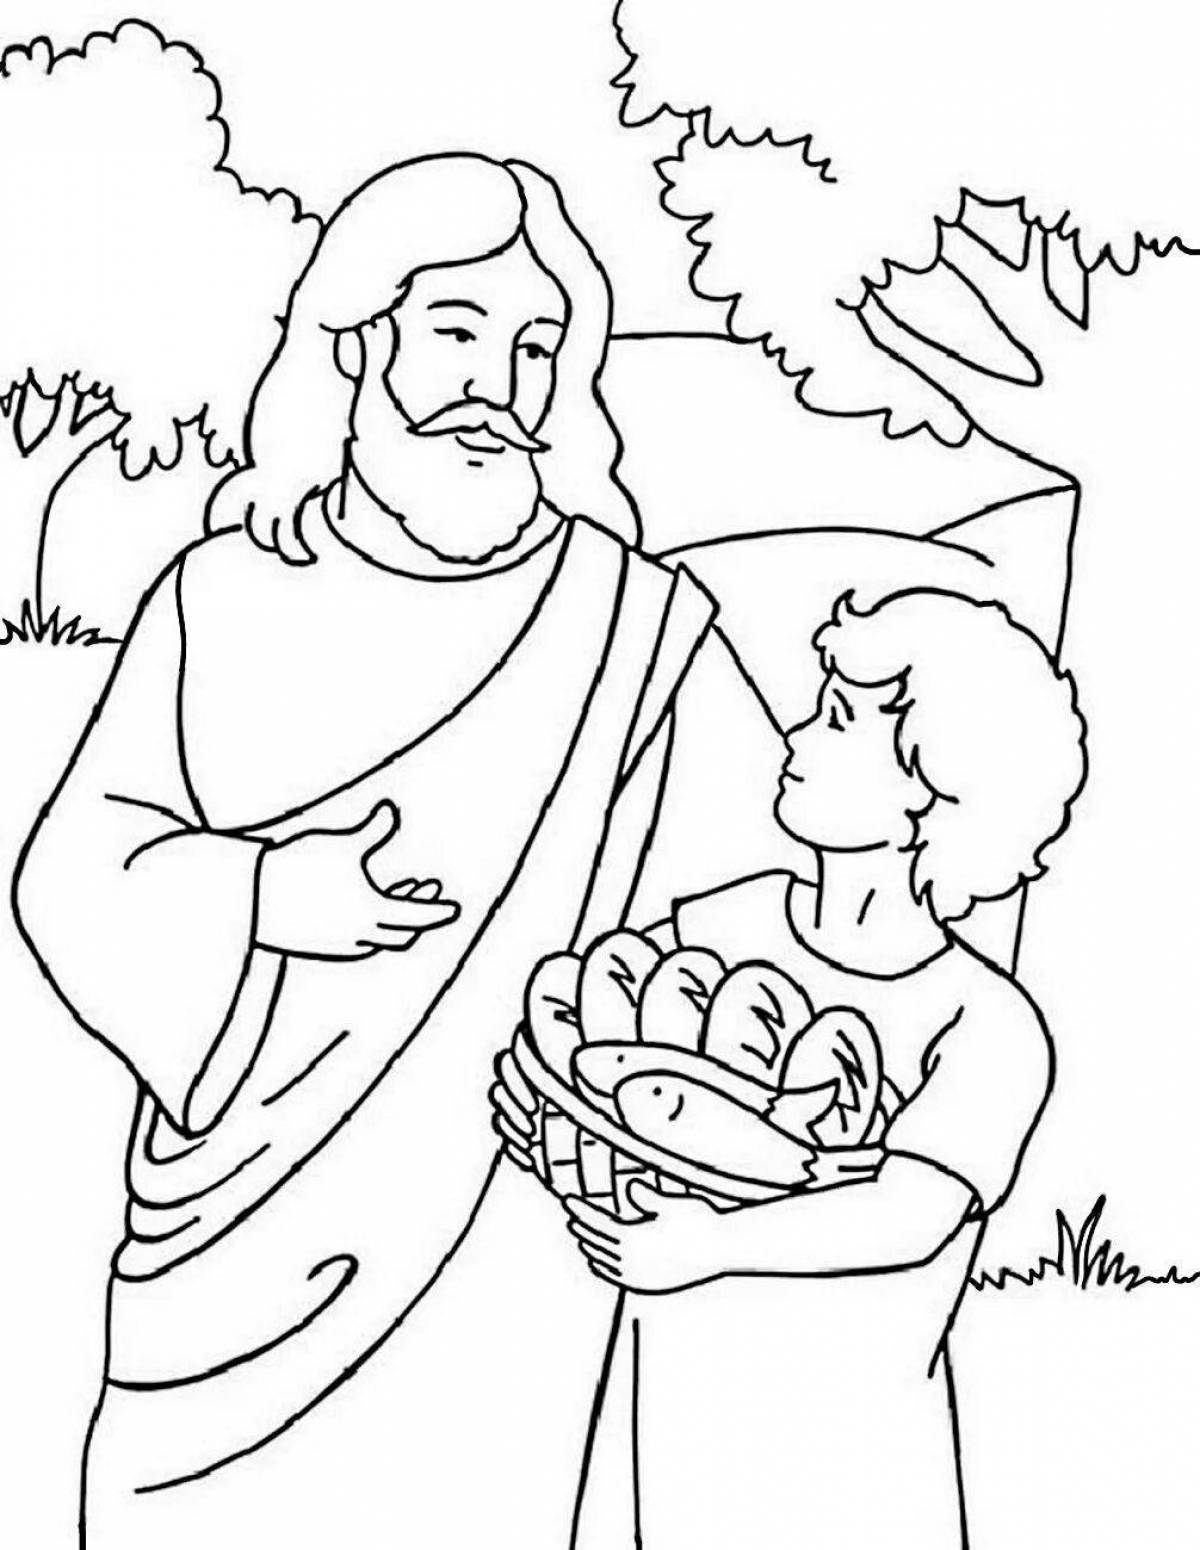 Majestic christian coloring book